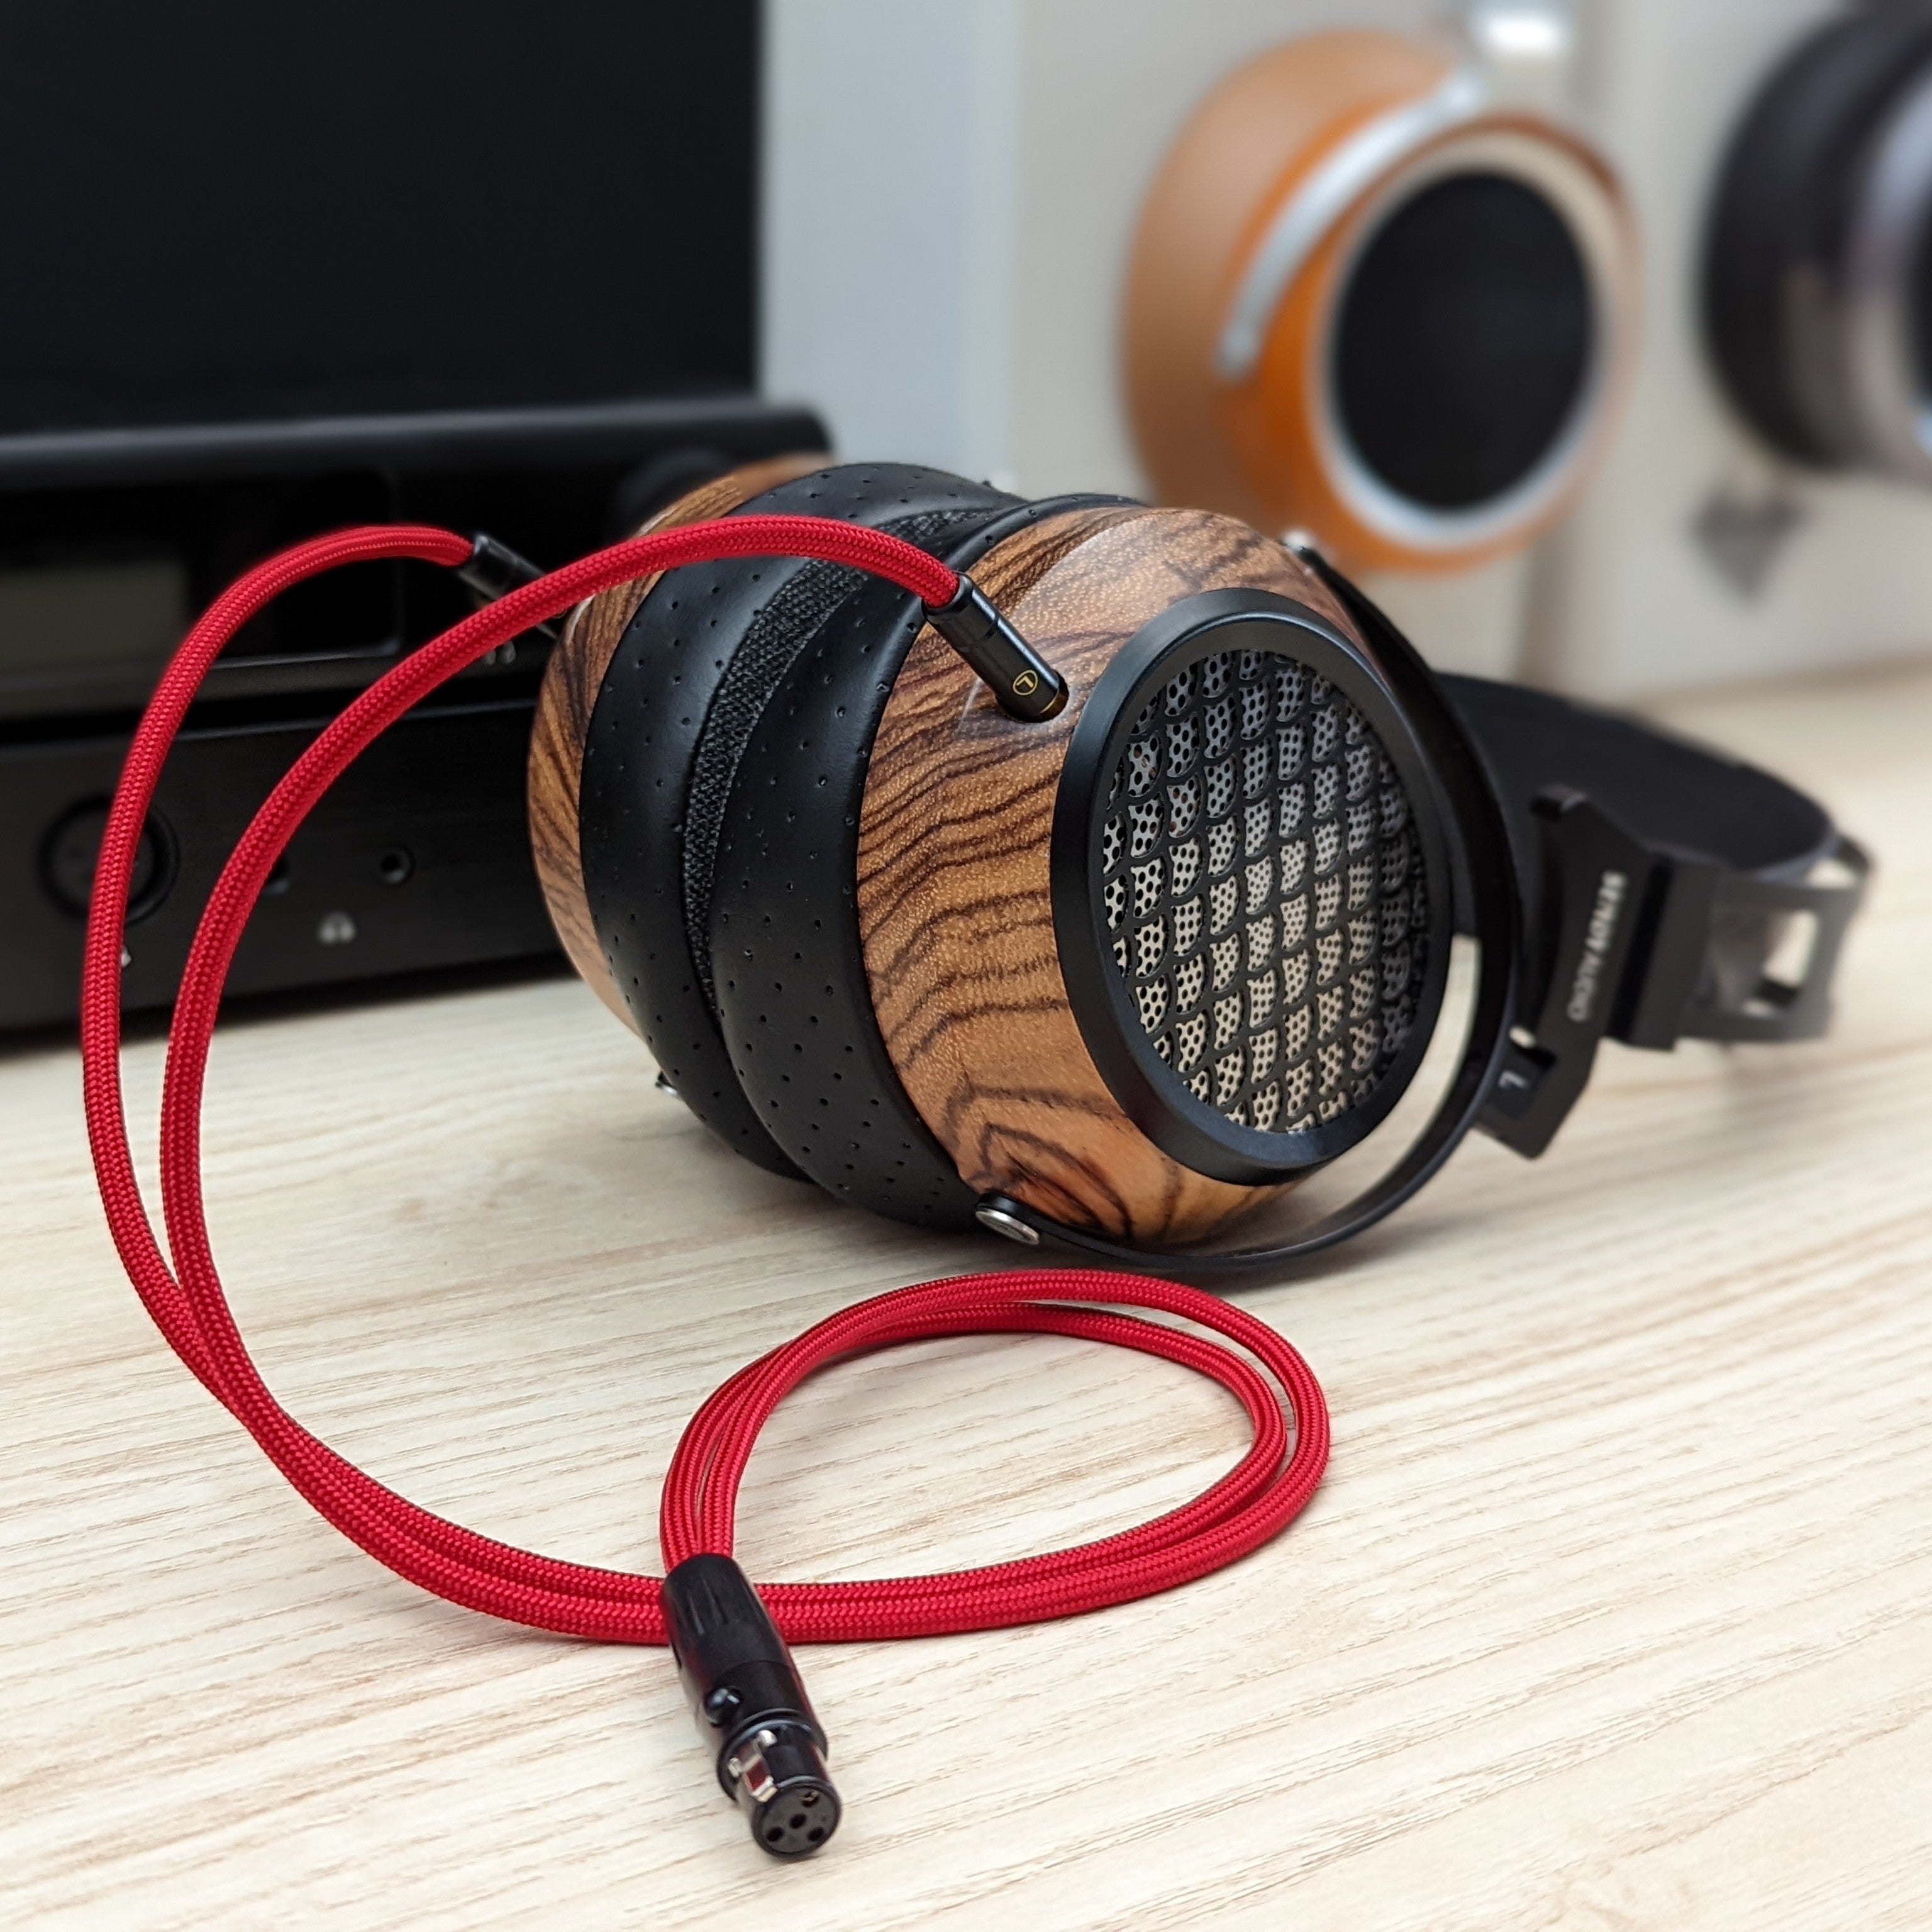 HC-7-Split: Dual 2.5mm split headphone cable for Sivga, Sendy, Abyss + more